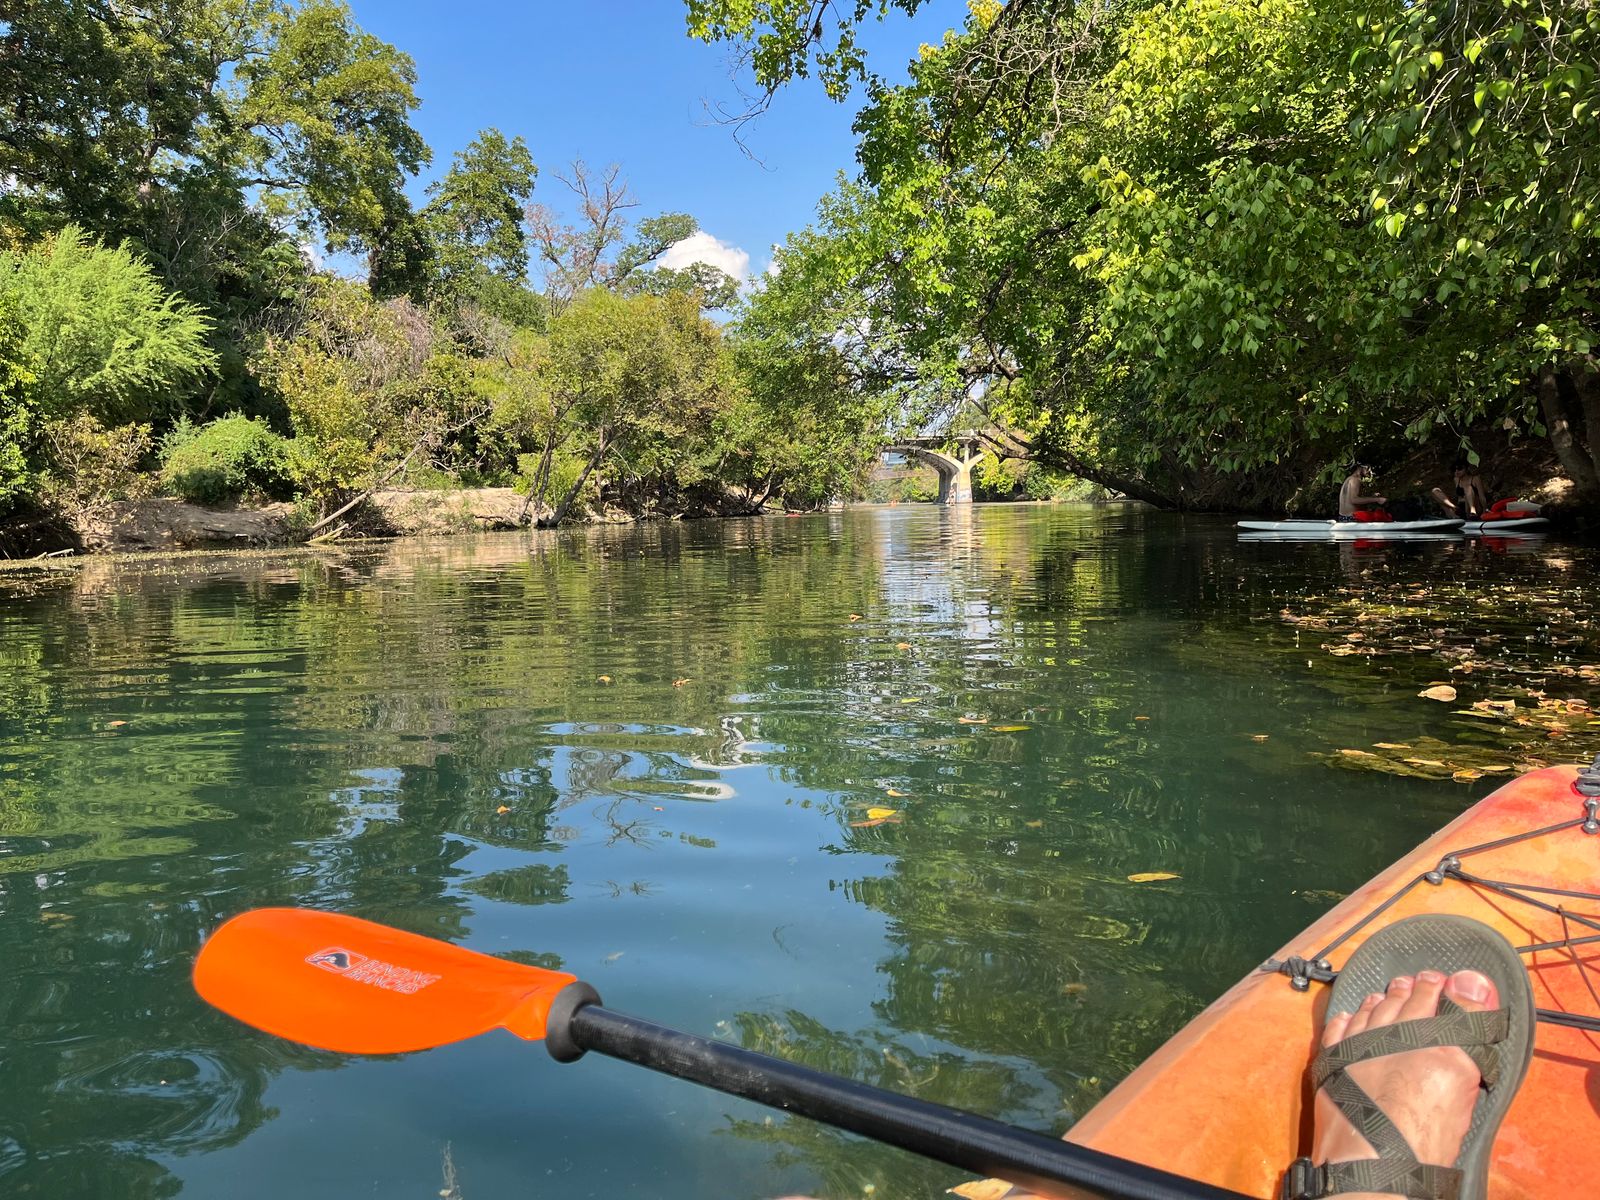 Kayaking near downtown Austin up a small creek surrounded by trees